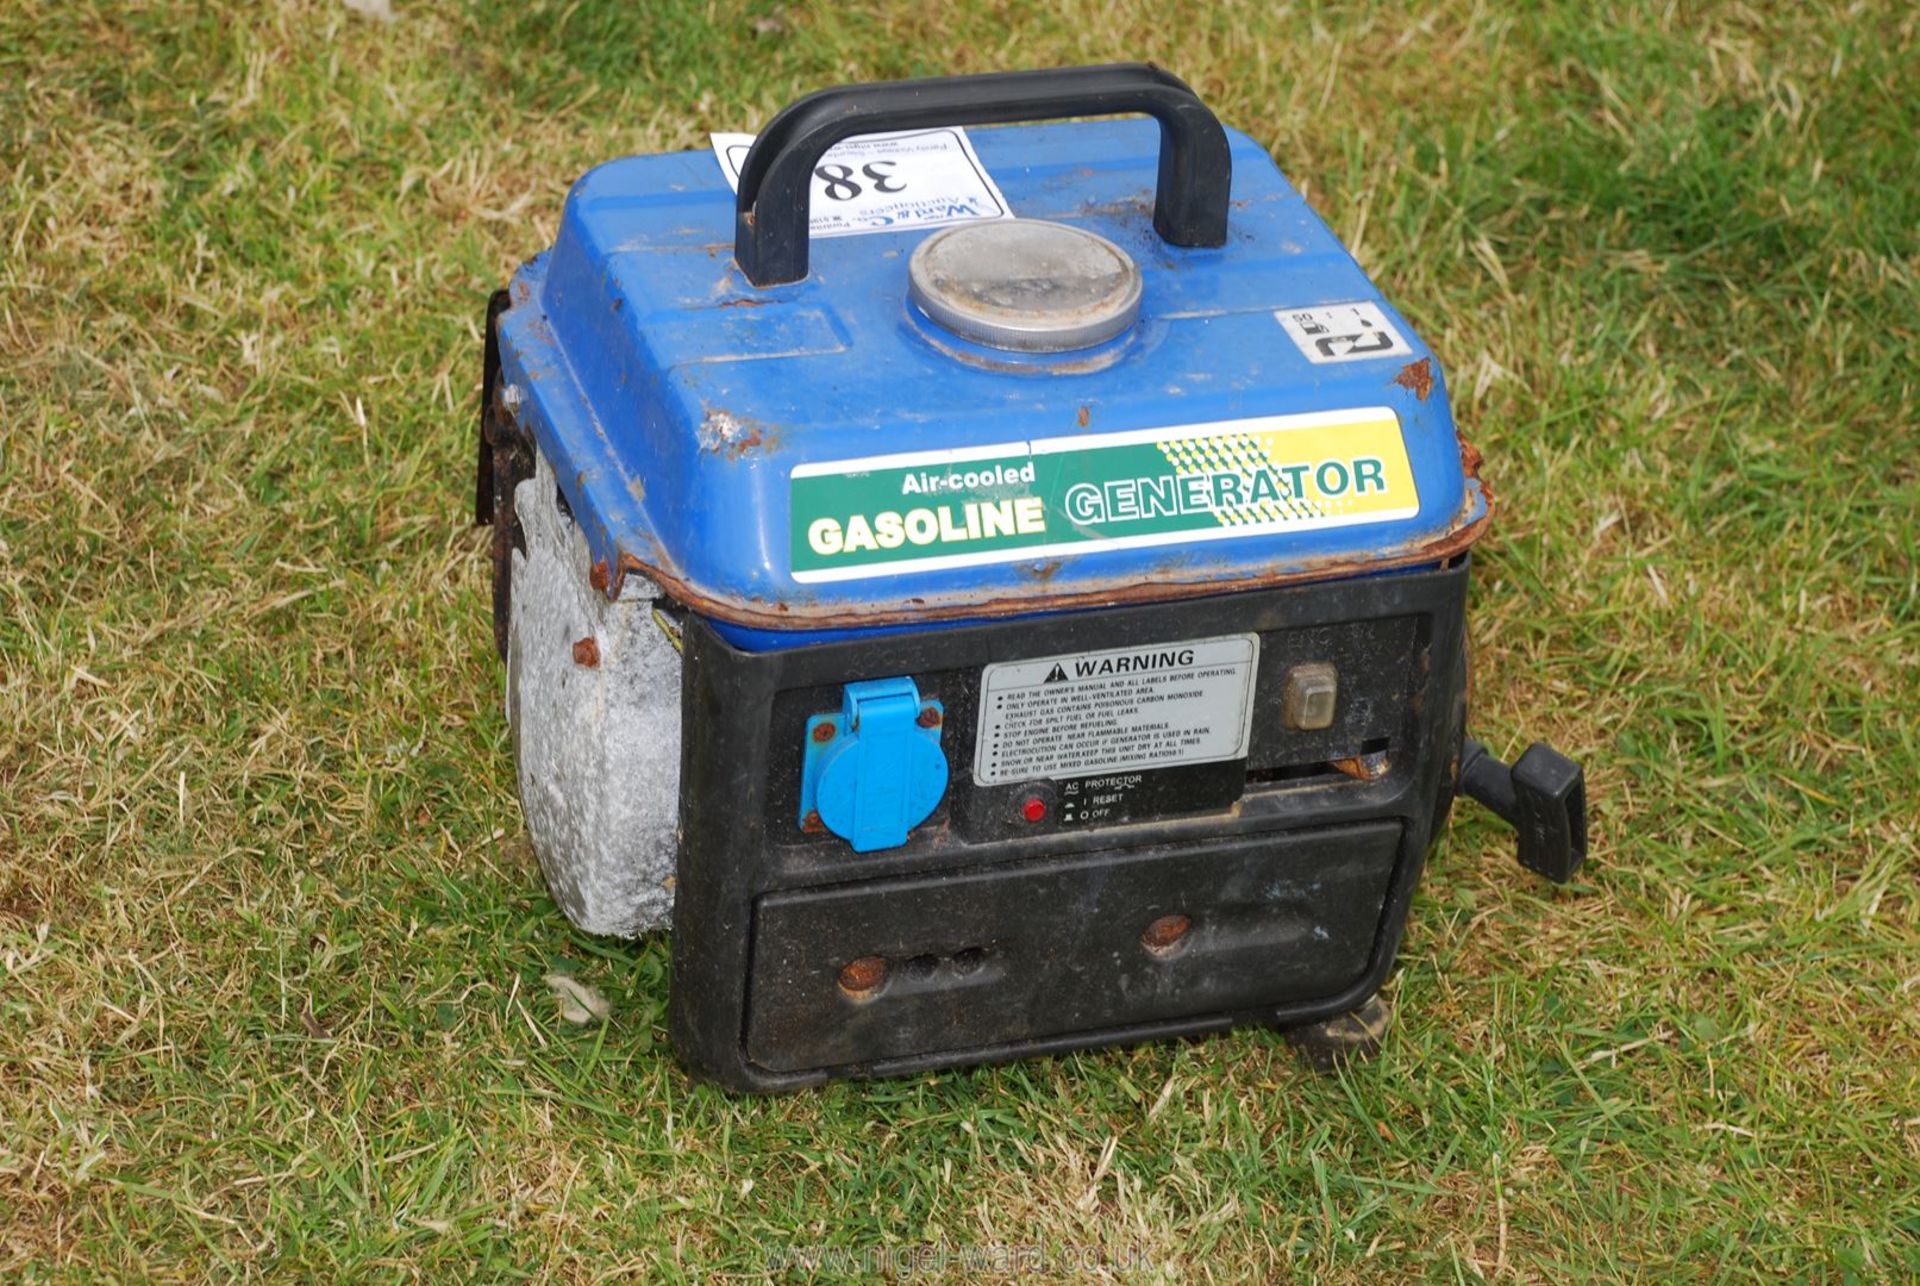 A "Air-cooled" two-stroke Petrol Generator. - Image 2 of 2